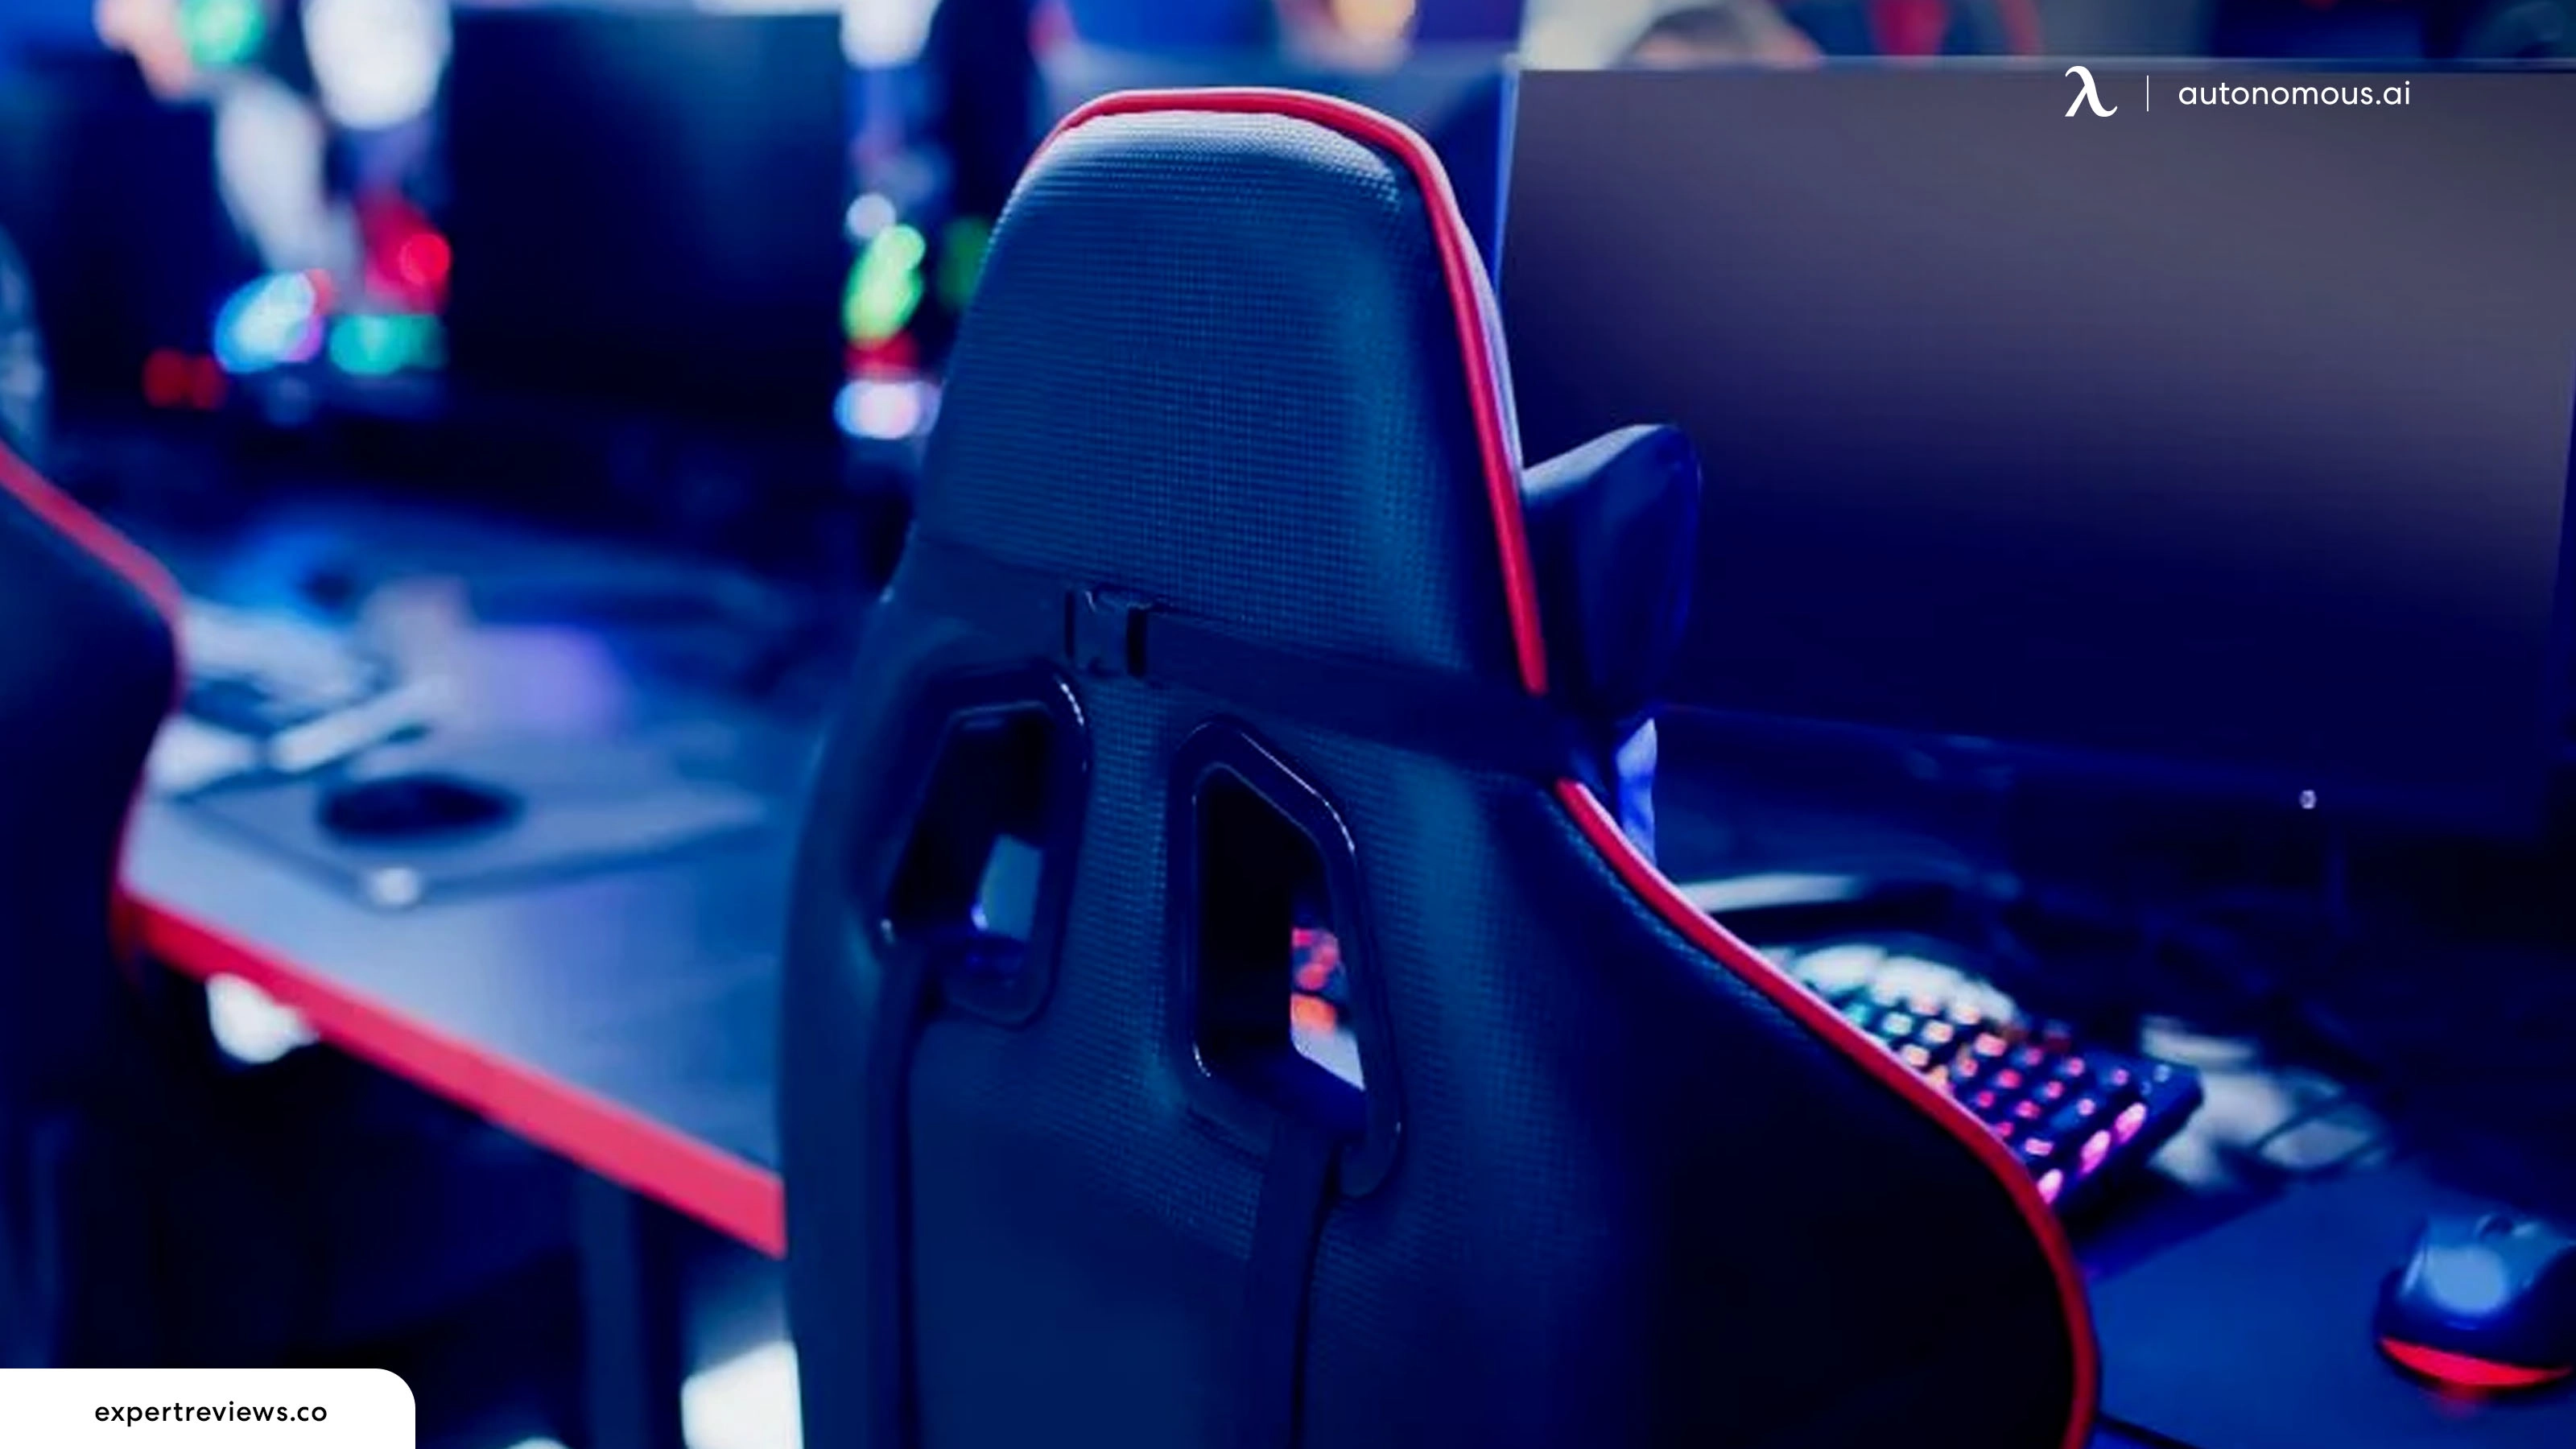 Why Should You Avoid Cheap Gaming Chairs Under $100?